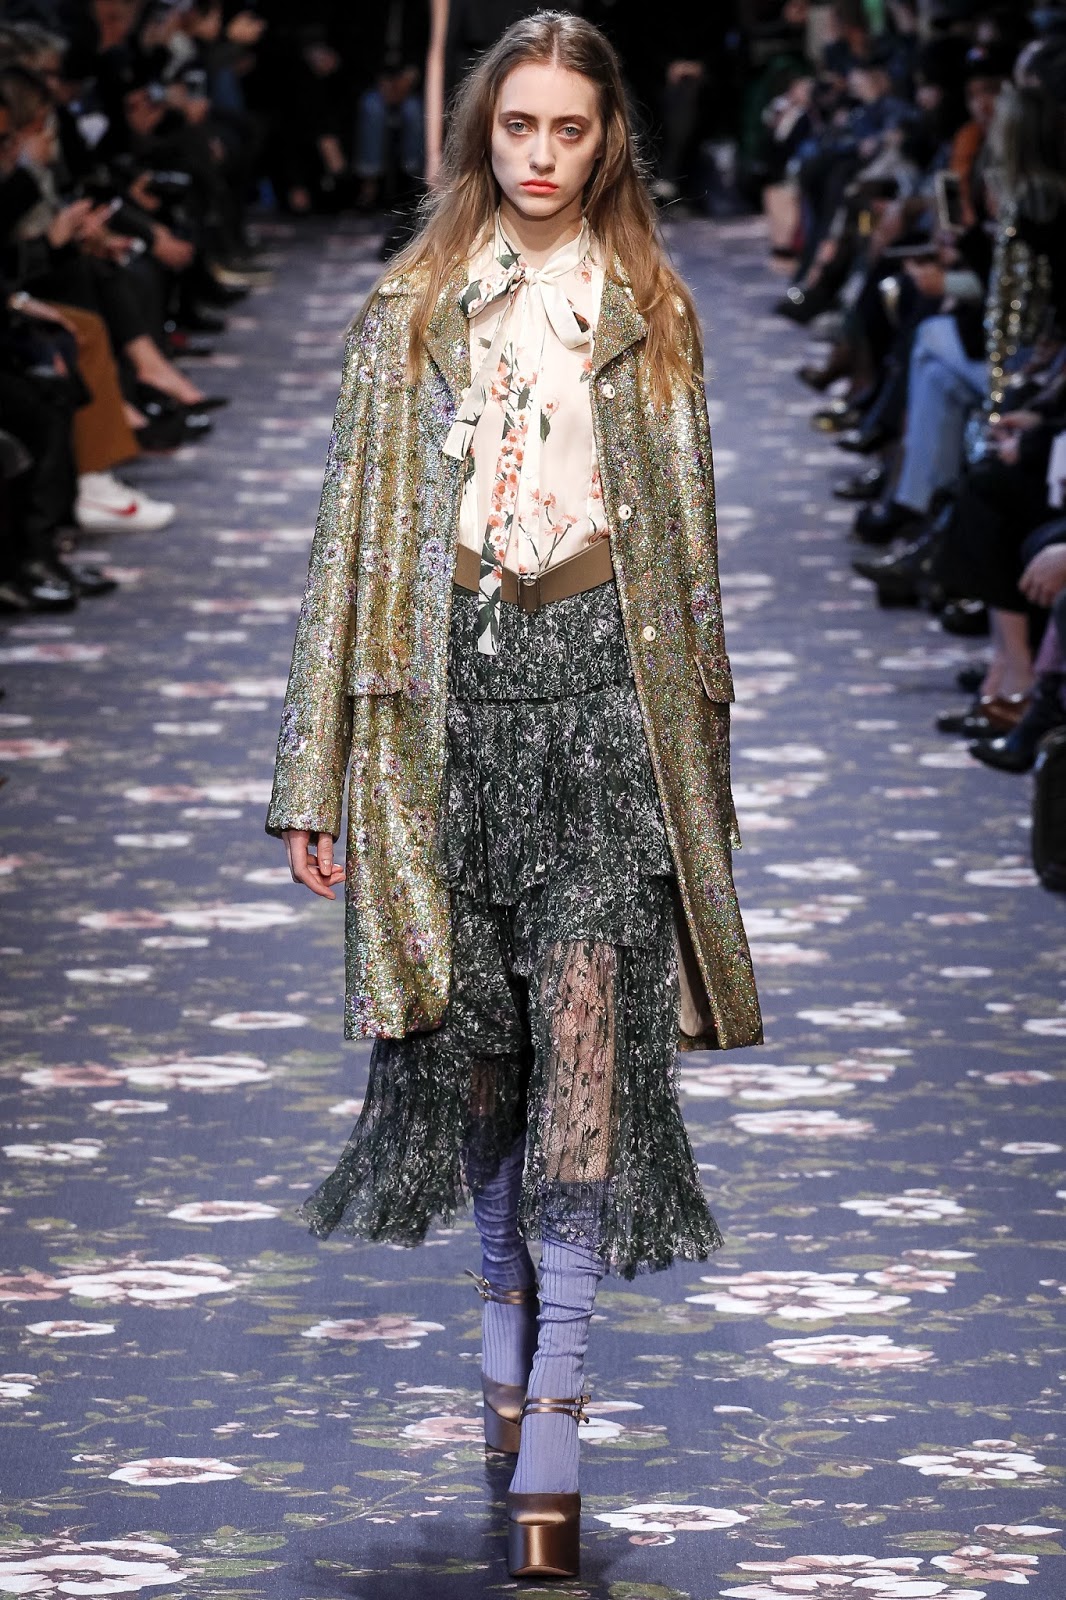 ROCHAS: SPARKLE AND GLAM ON THE RUNWAY March 4, 2016 | ZsaZsa Bellagio ...